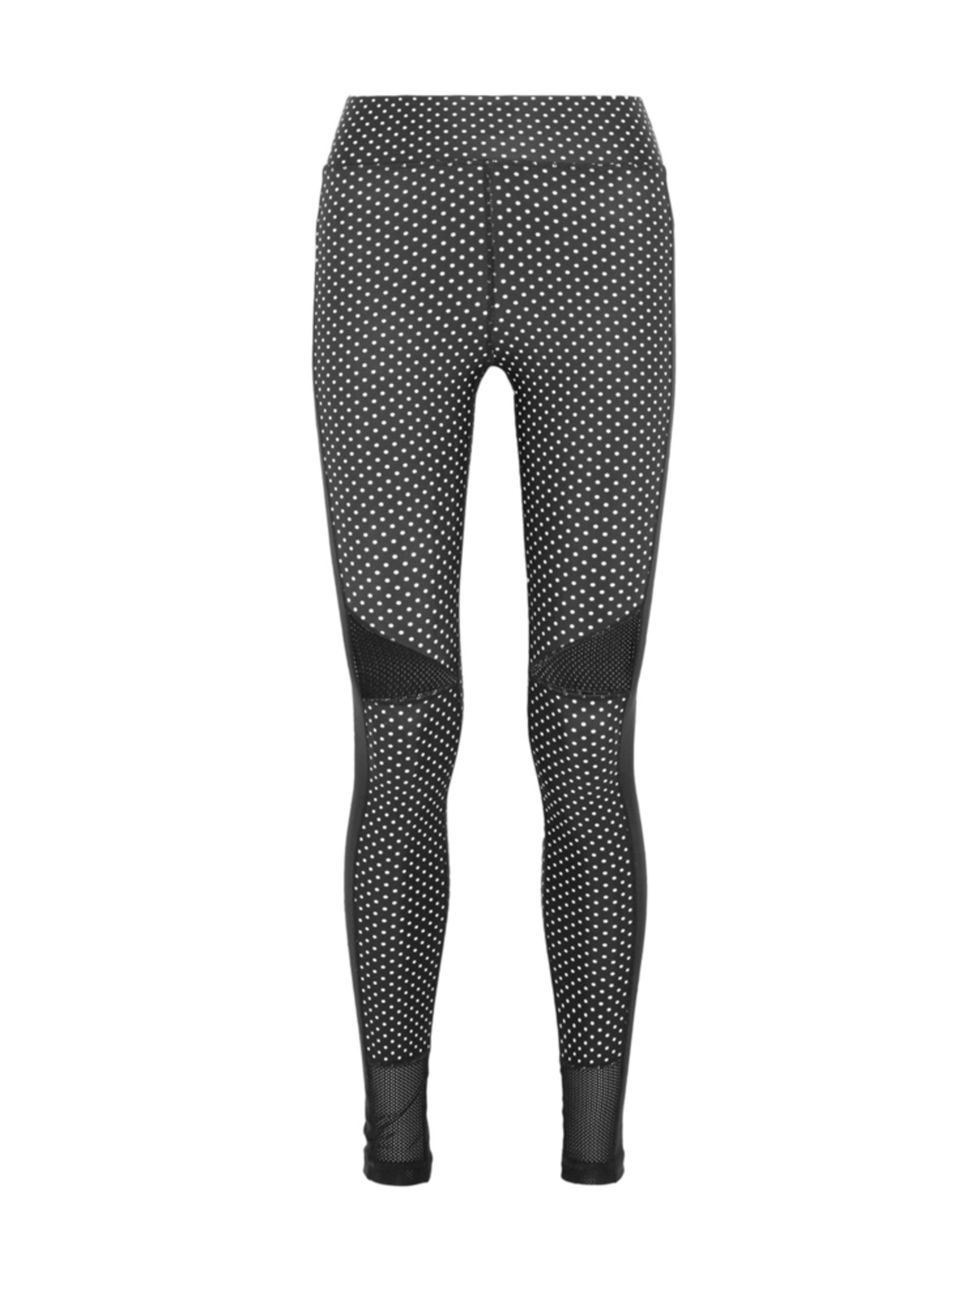 <p>THE UPSIDE</p>

<p>Luxury activewear that won't make you look out of place on those days where you never quite make it out of your gym gear.</p>

<p>The Upside leggings, £85, from <a href="http://www.matchesfashion.com/products/The-Upside-Prana-polka-d